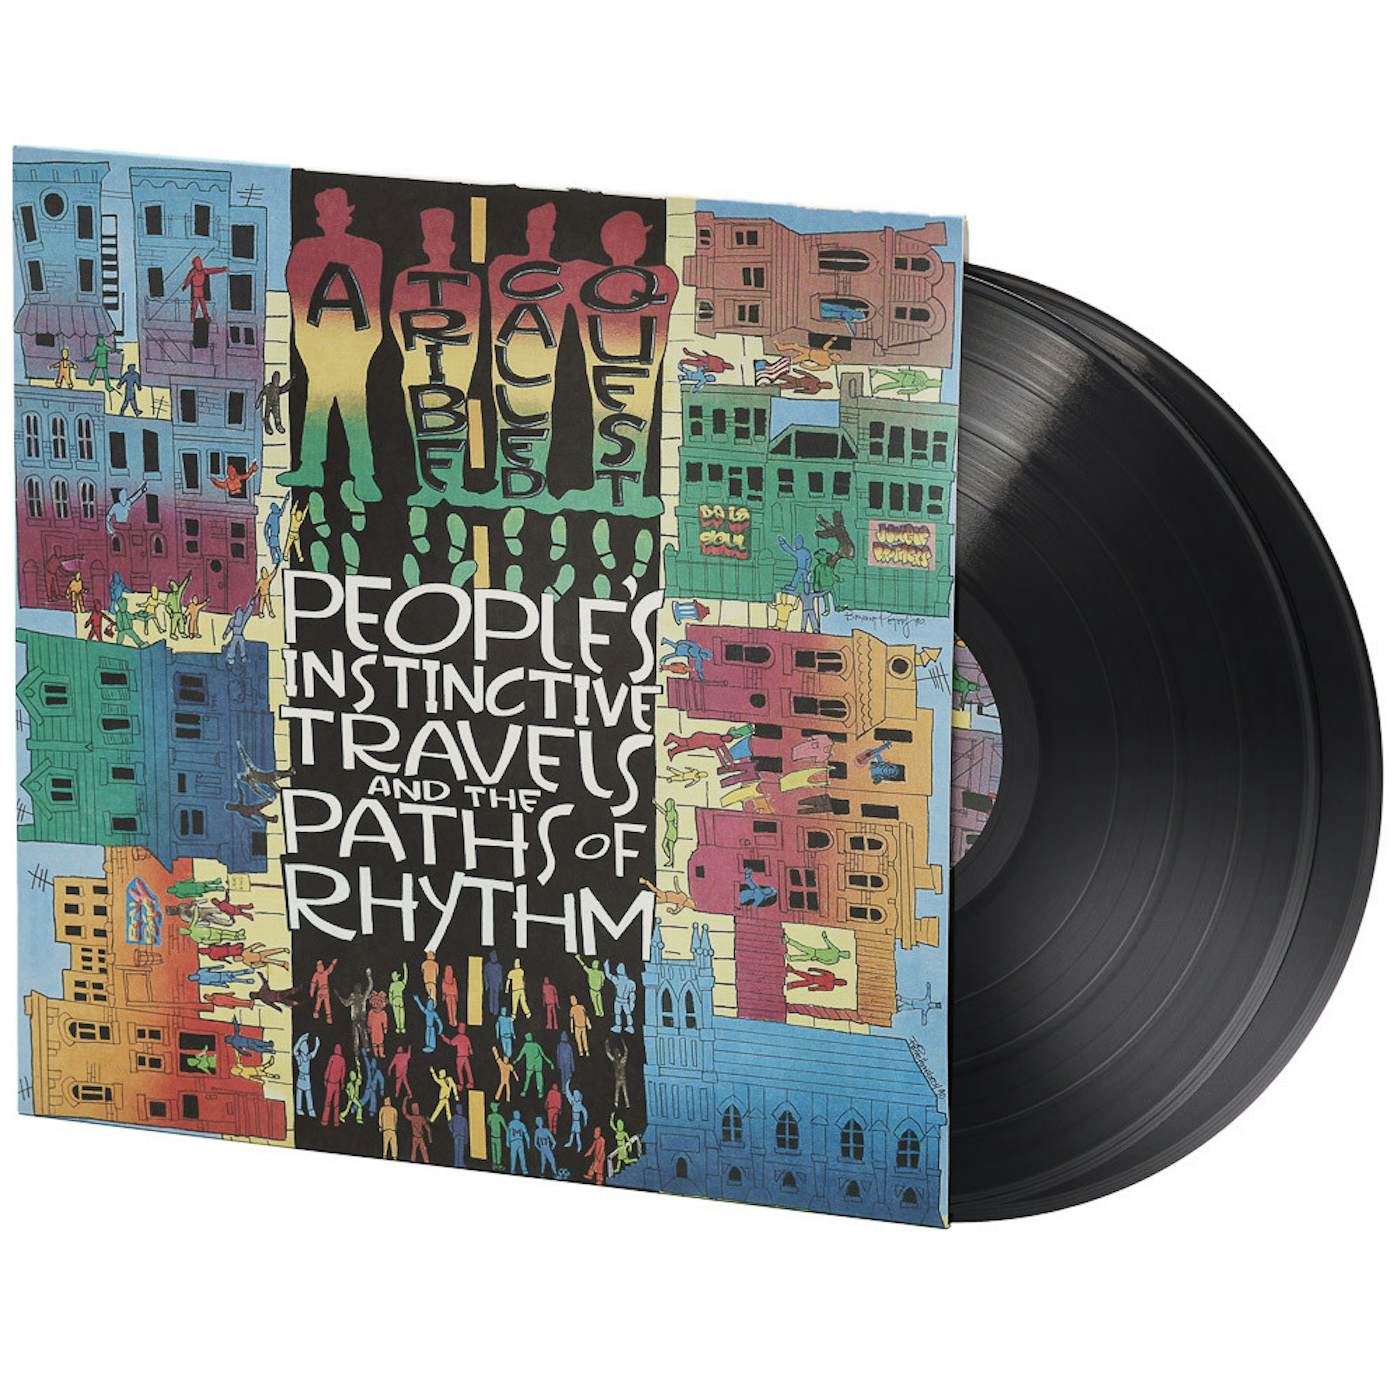 A Tribe Called Quest PEOPLE'S INSTINCTIVE TRAVELS & PATH OF RHYTHM Vinyl Record